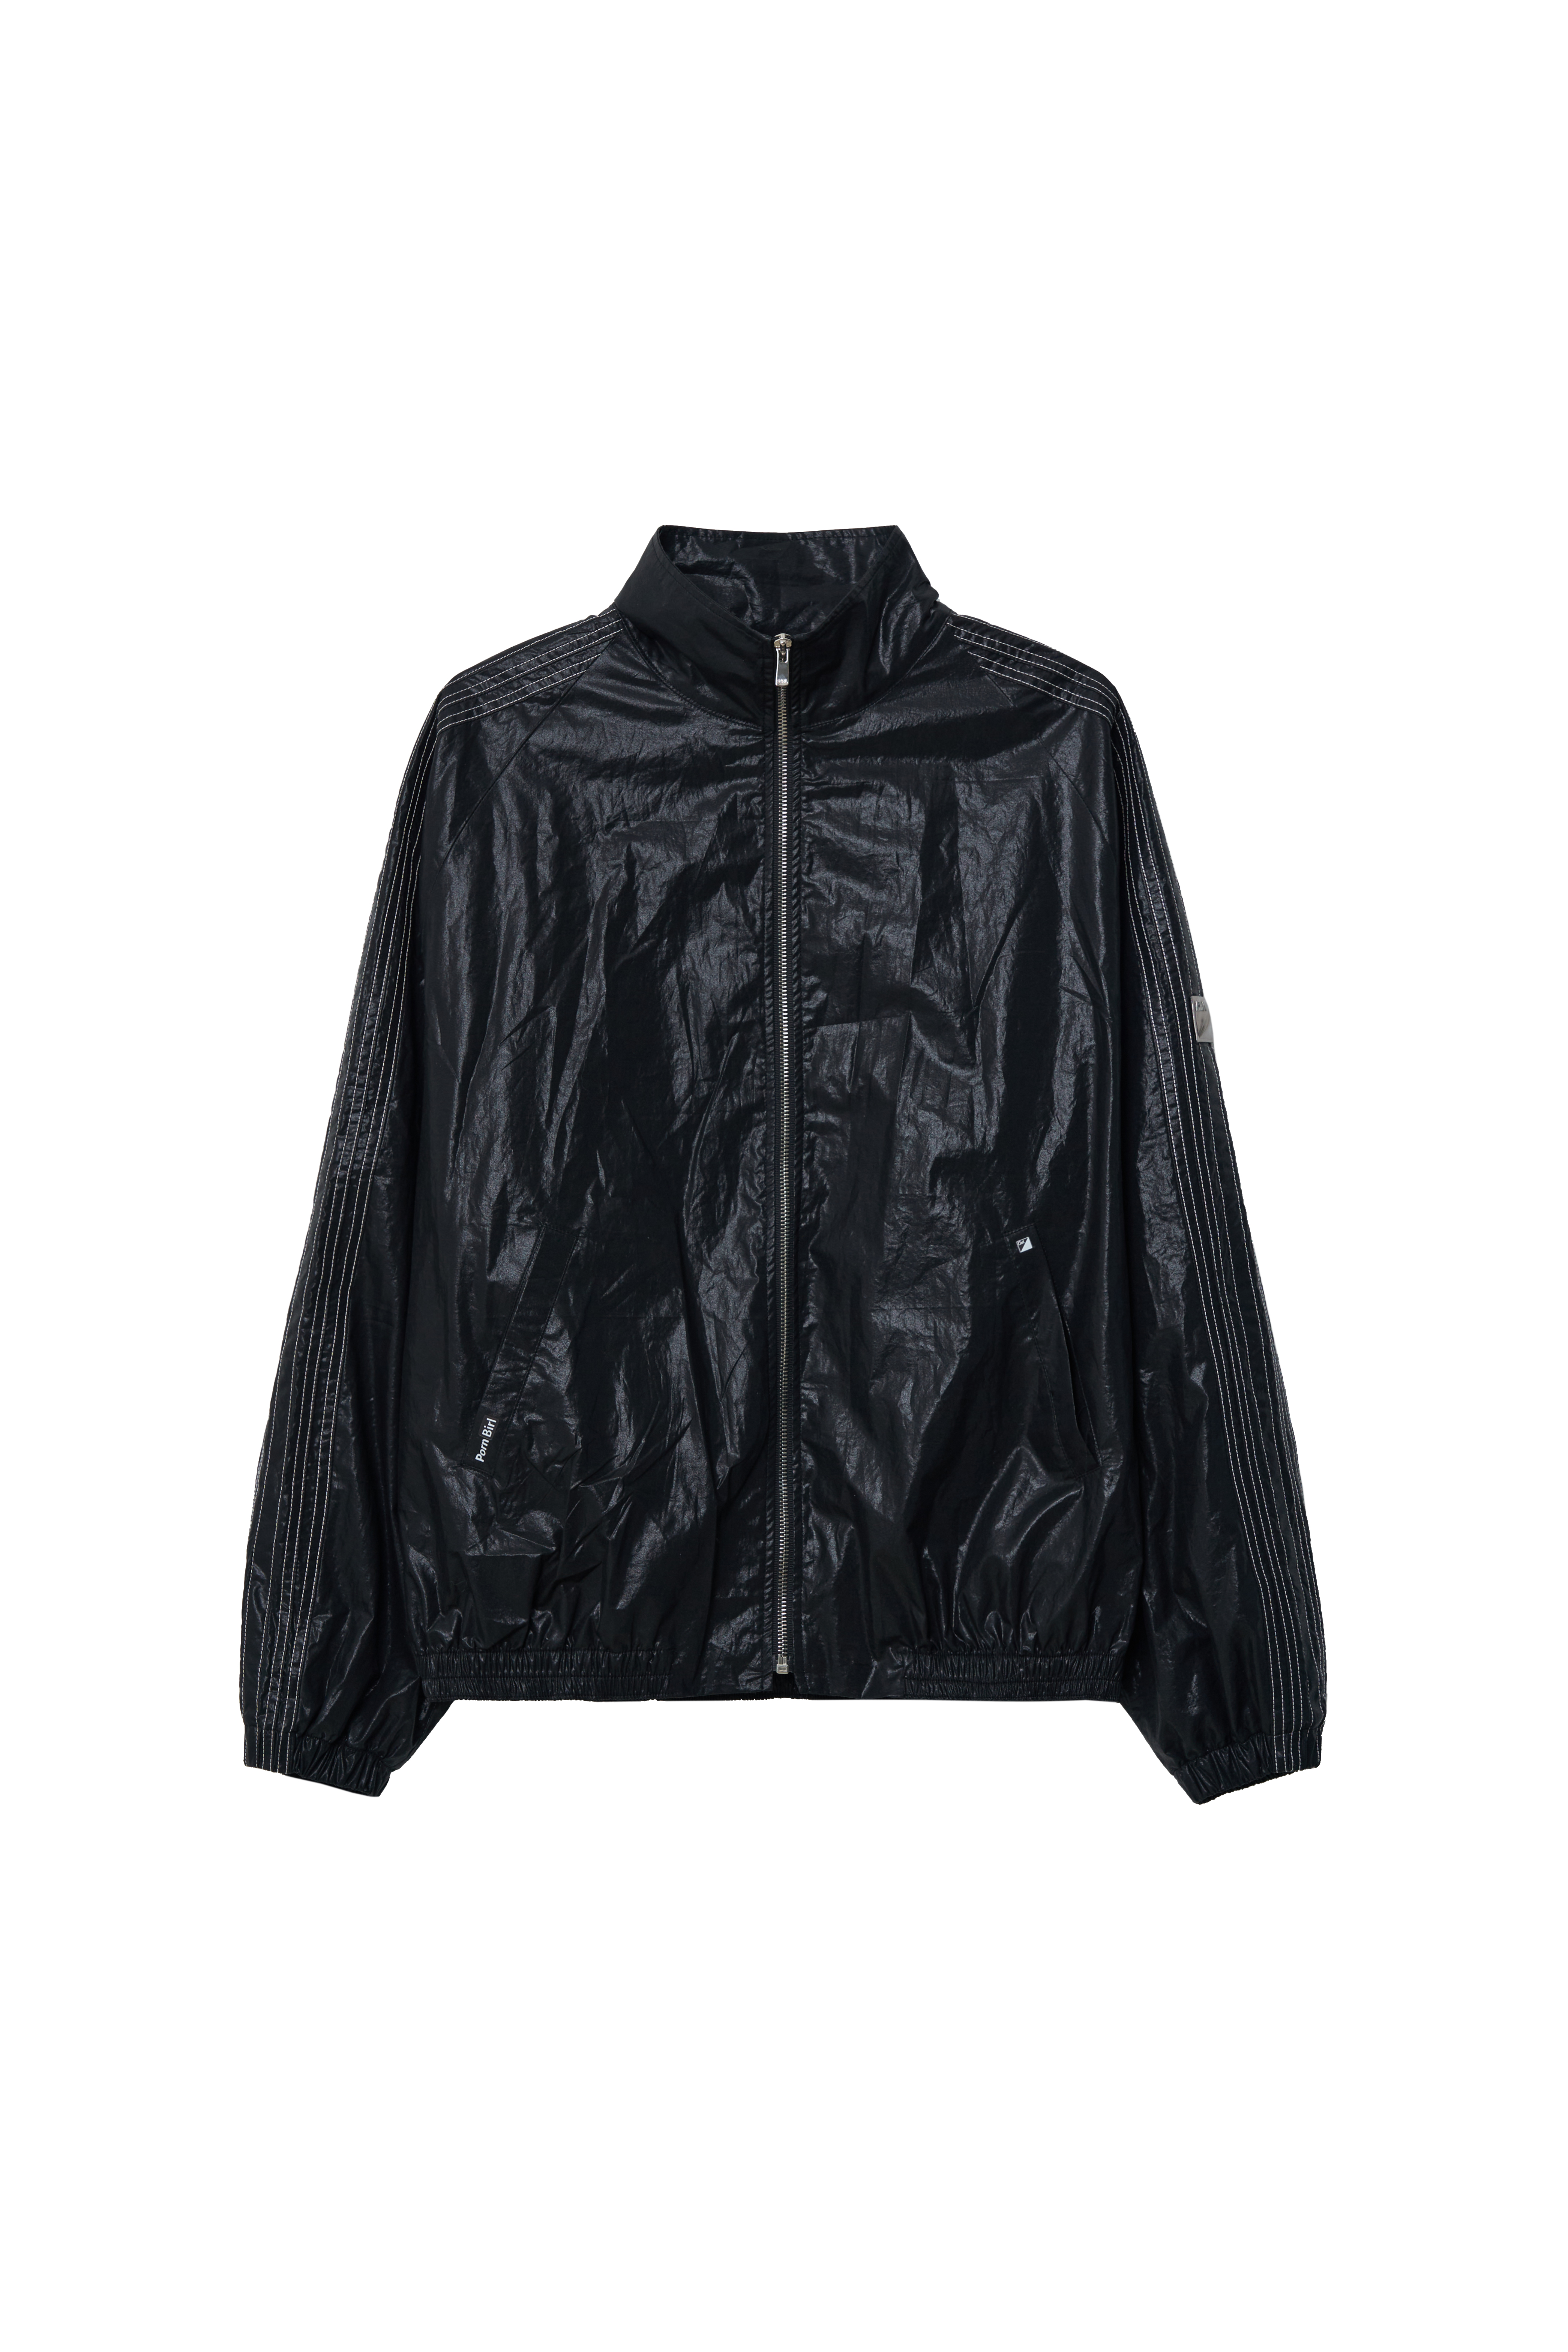 Road Over the Rainbow (R.O.R) Zip-up Jacket